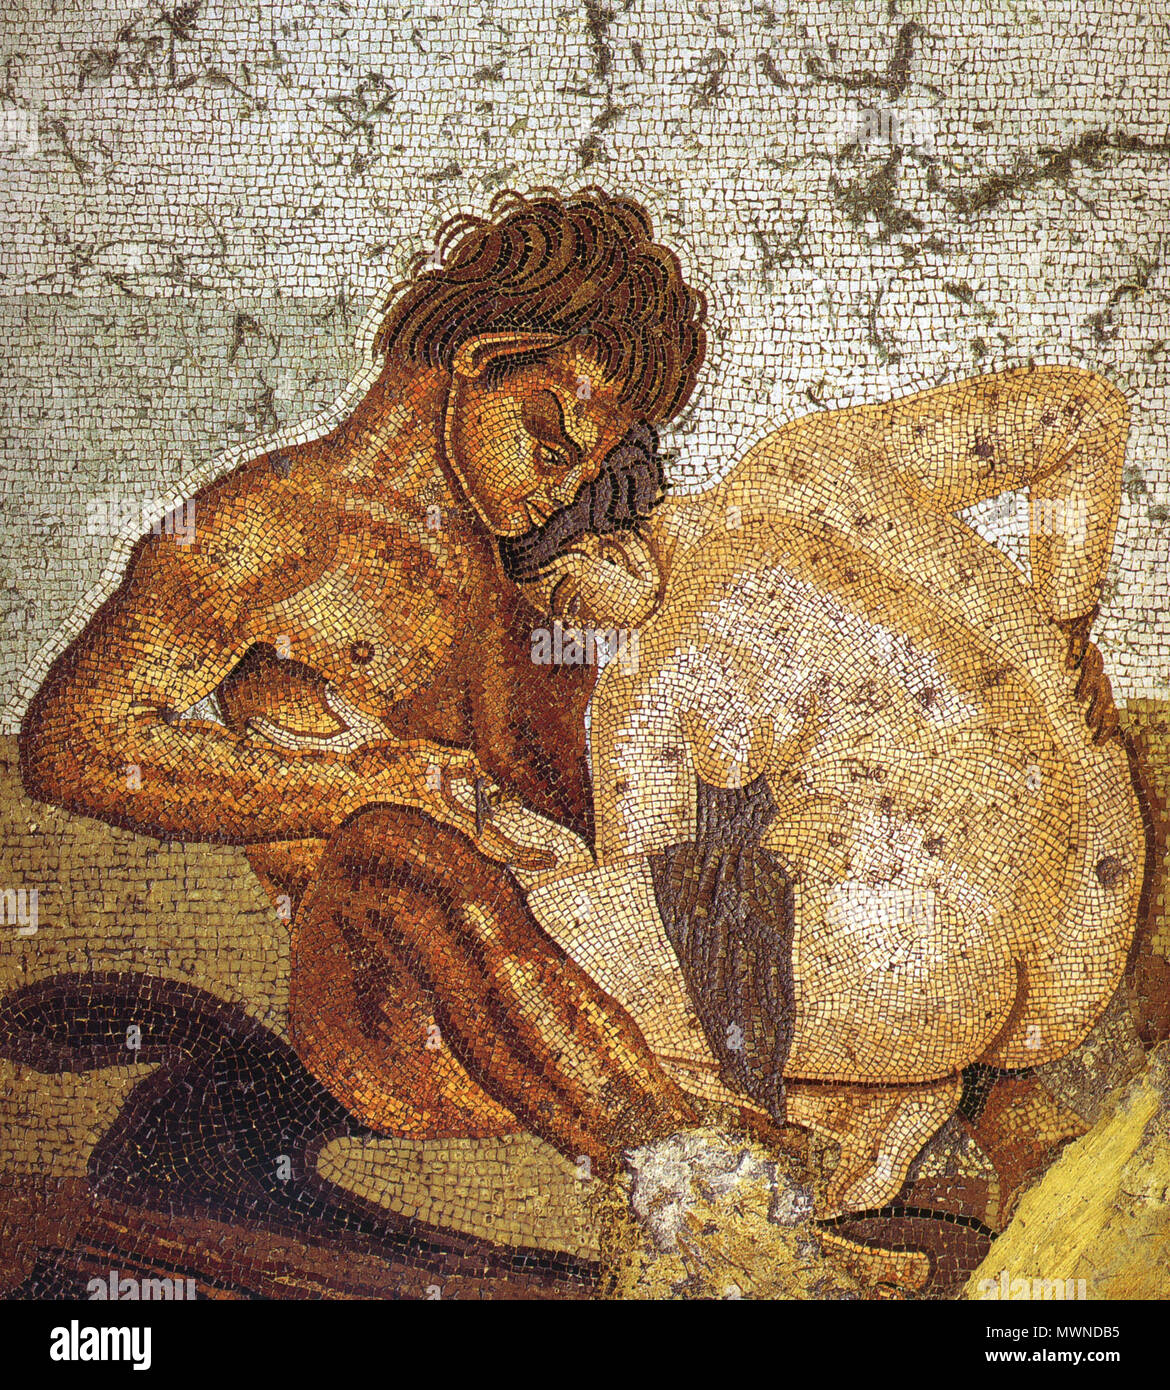 . English: Satyr and nymph. Roman mosaic from the cubiculum in the Casa del Fauno (VI 12, 2-5) in Pompeii. Museo Archeologico Nazionale (Naples), inv. nr. 27707. Deutsch: Satyr und Nymphe. Römisches Mosaik aus dem Cubiculum in der Casa del Fauno (VI 12, 2-5) in Pompeji. Museo Archeologico Nazionale (Neapel), inv. nr. 27707. 13 March 2009. WolfgangRieger 492 Pompeii - Casa del Fauno - Satyr and Nymph - MAN Stock Photo